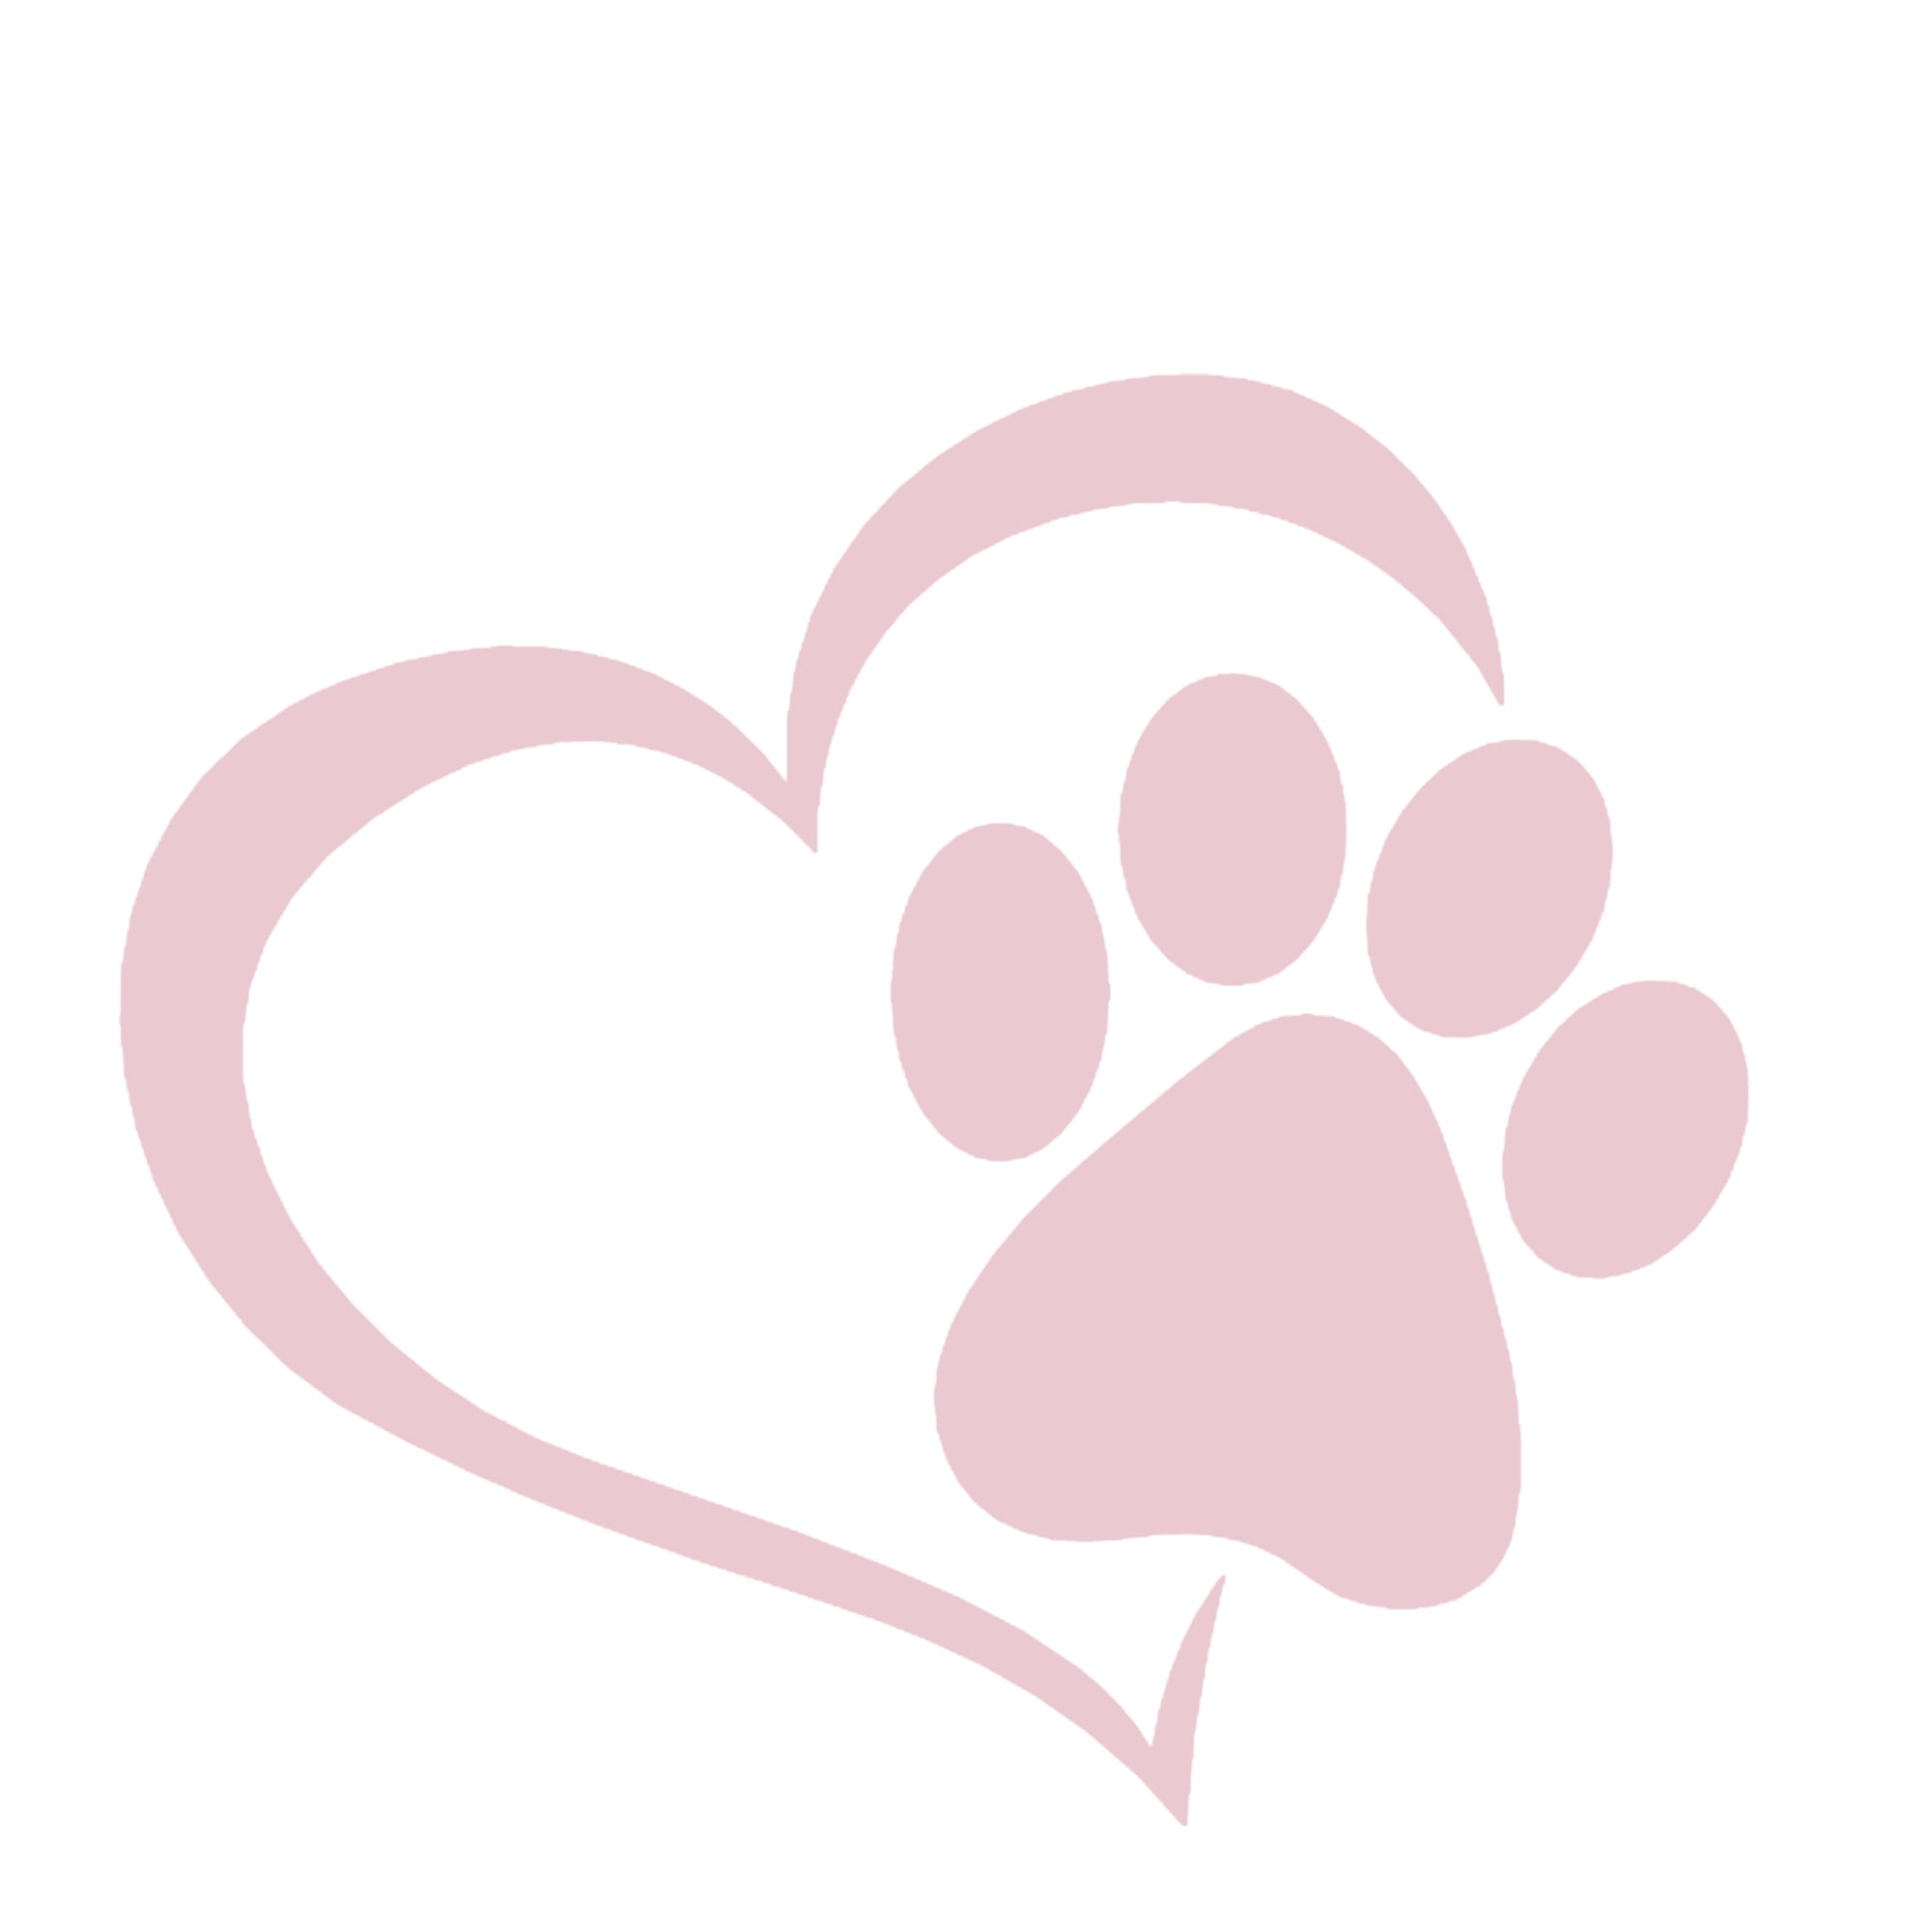 Dog Paw & Heart - 4.25 - Car Truck Window Bumper Graphics Vinyl Sticker  Decal - Canine Dog Breeds Family Pet Love Paw Puppy Shelter Adopt 